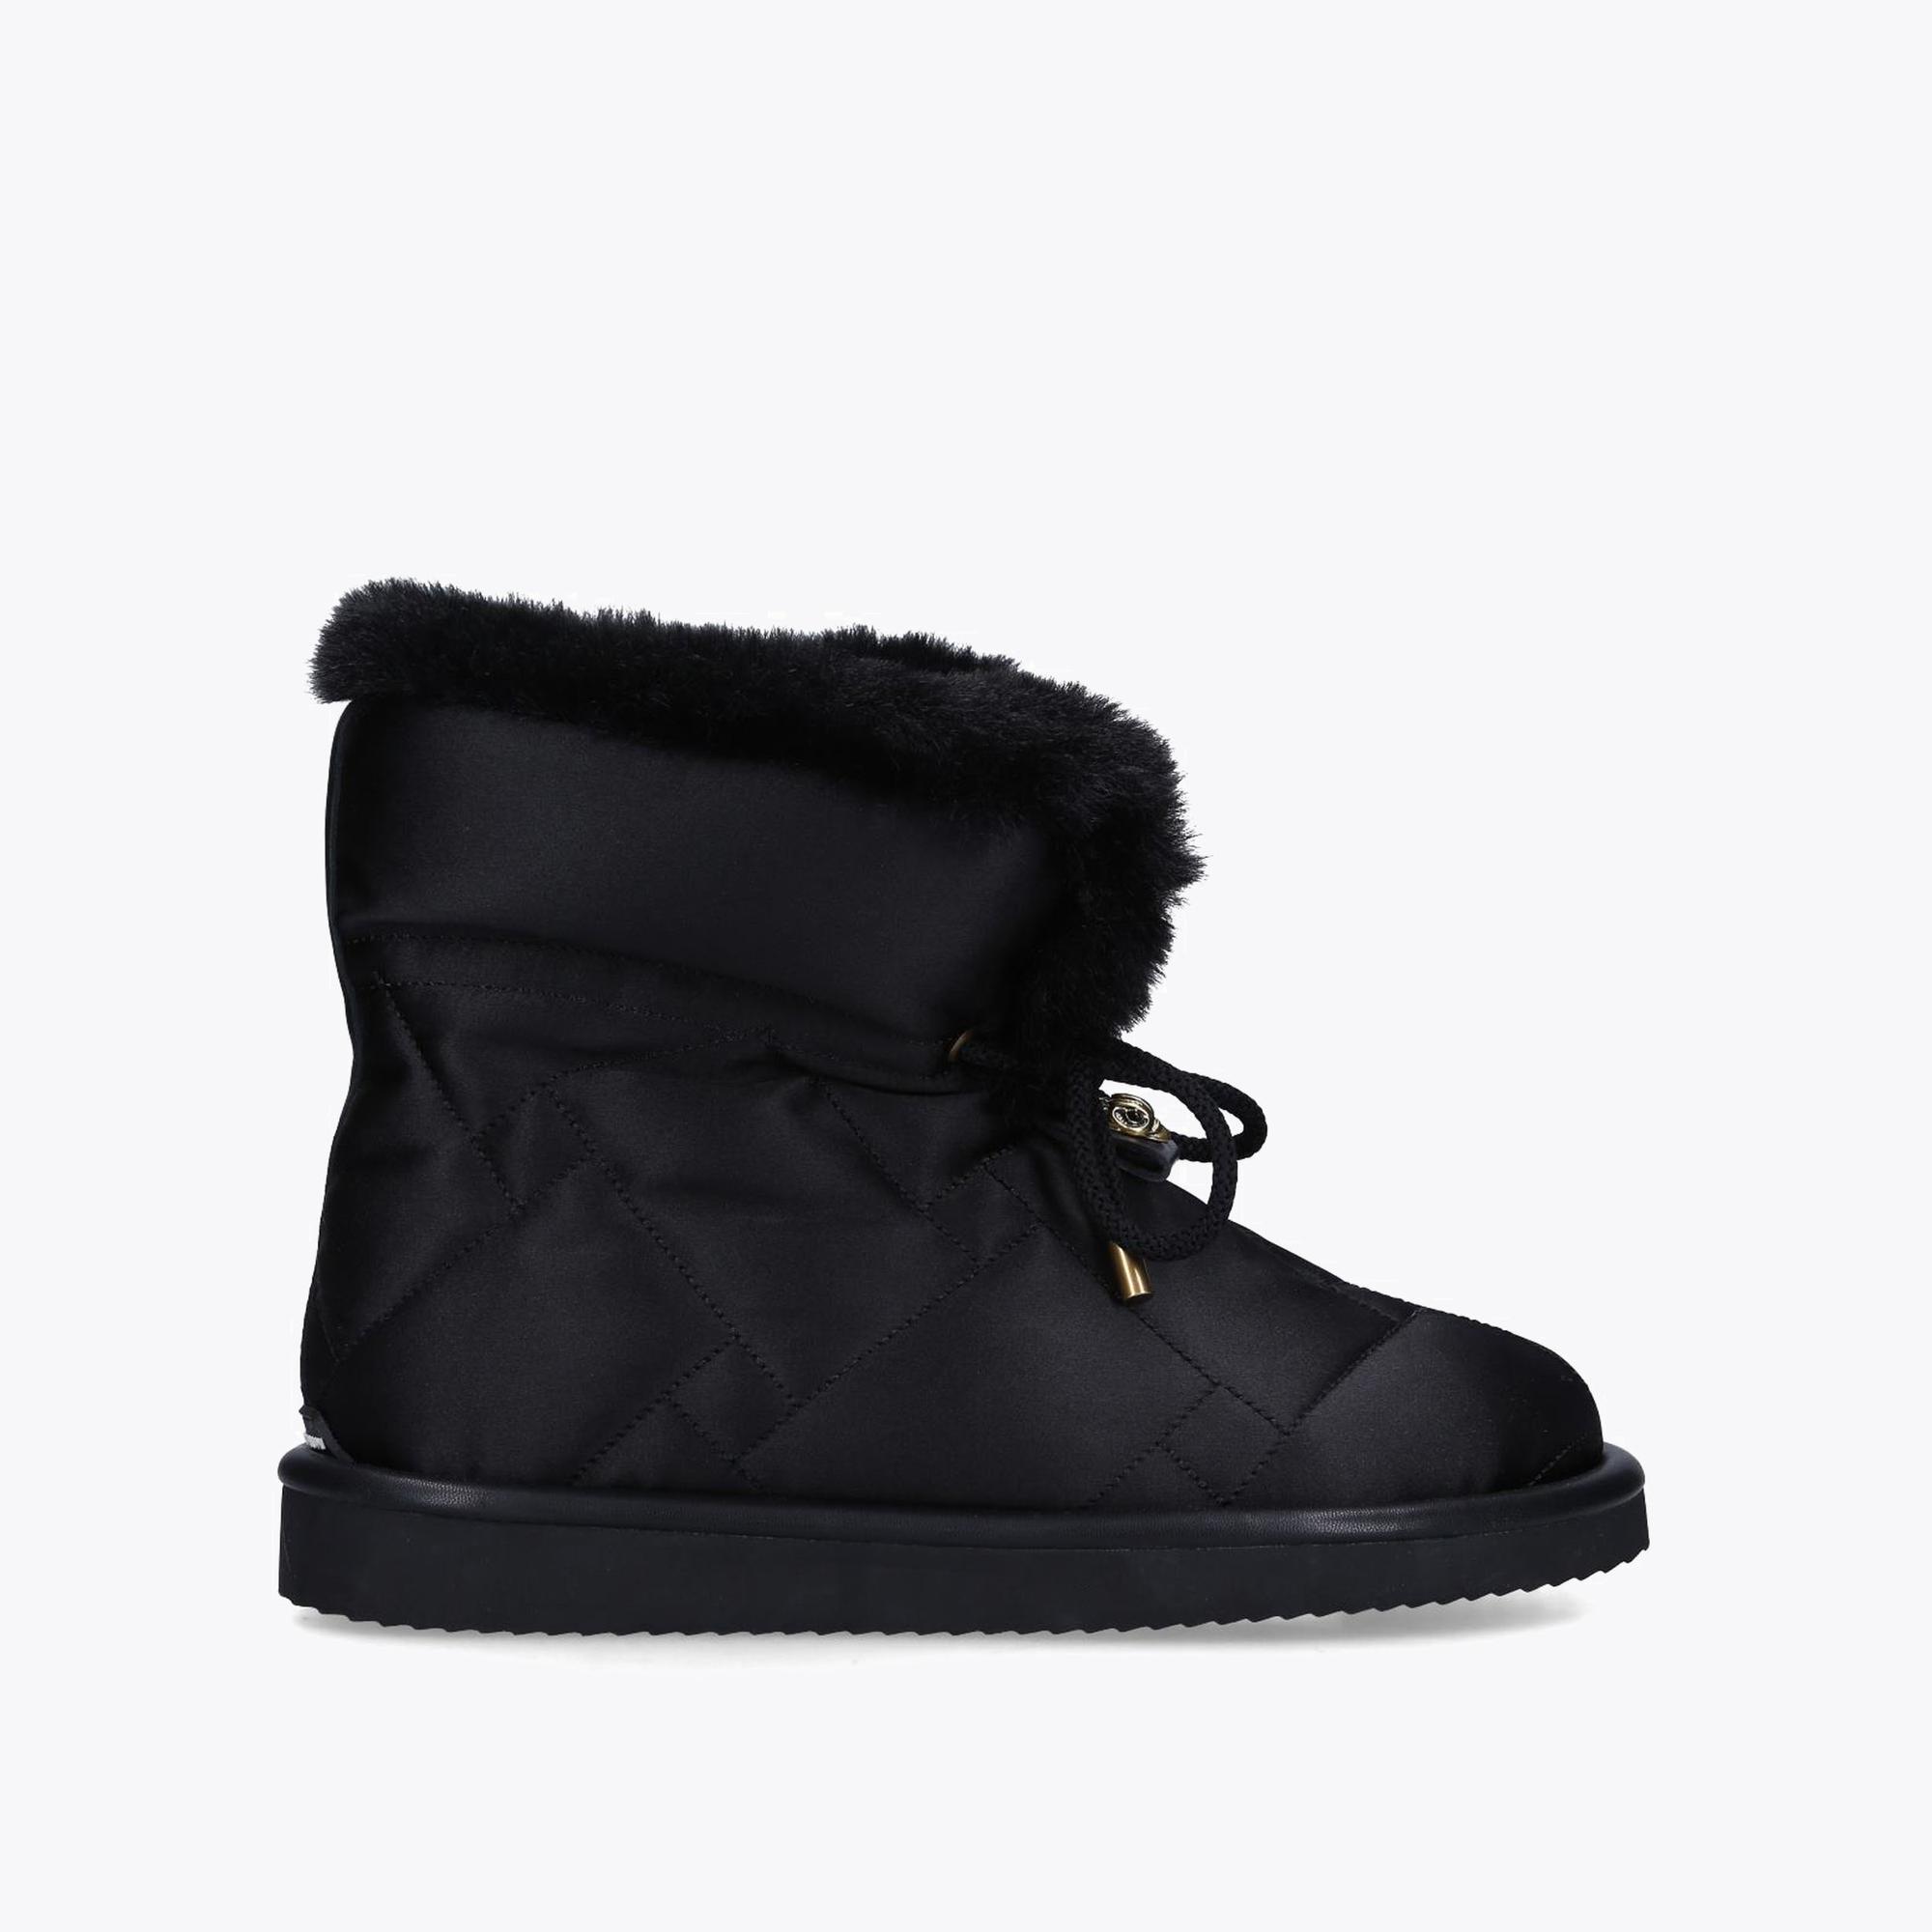 ORSON PUFFER BOOTIE Black Orson Lace Up Quilted Nylon Puffer Boots